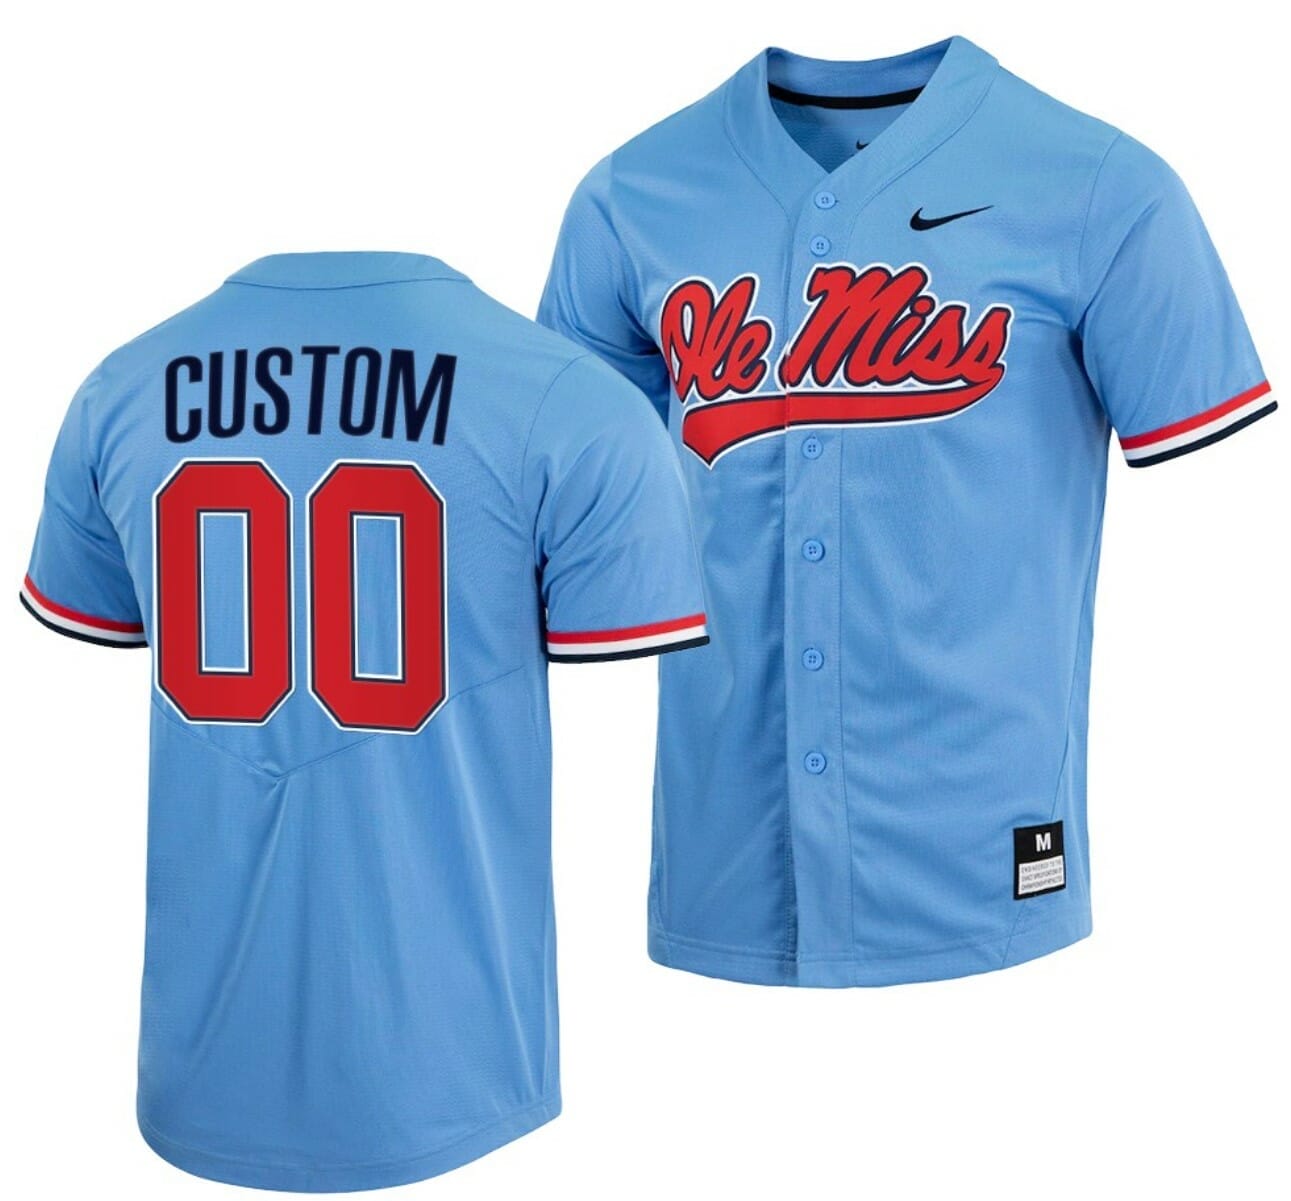 Custom NCAA Baseball Jersey Ole Miss Rebels Name and Number College Full-Button Blue